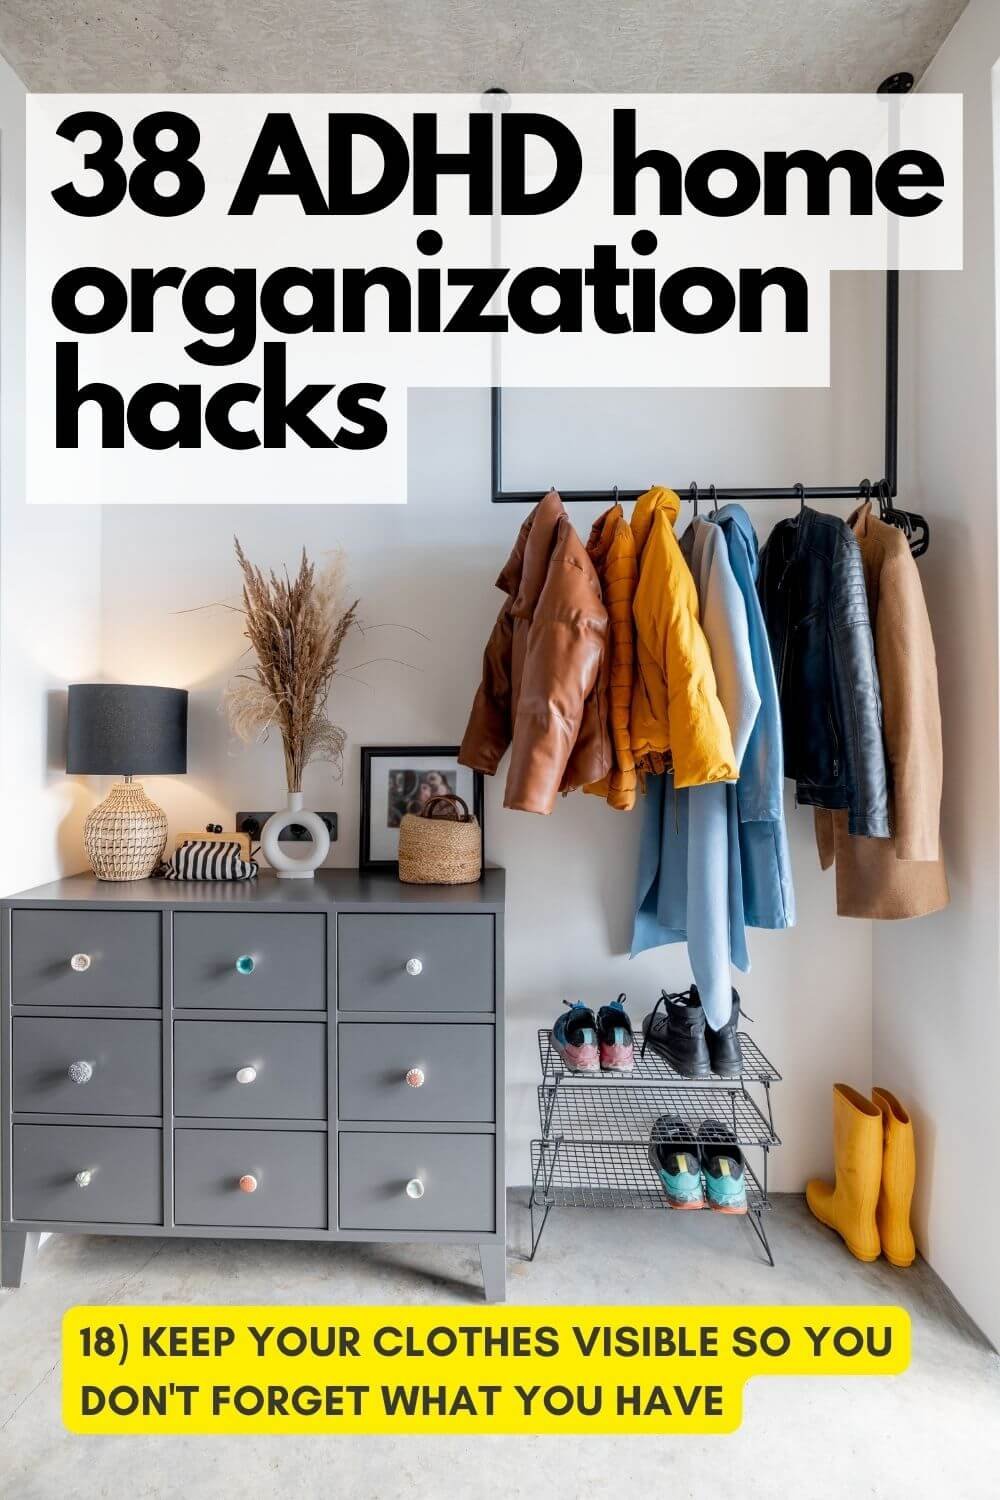 Bedroom Organization For ADHD Adults